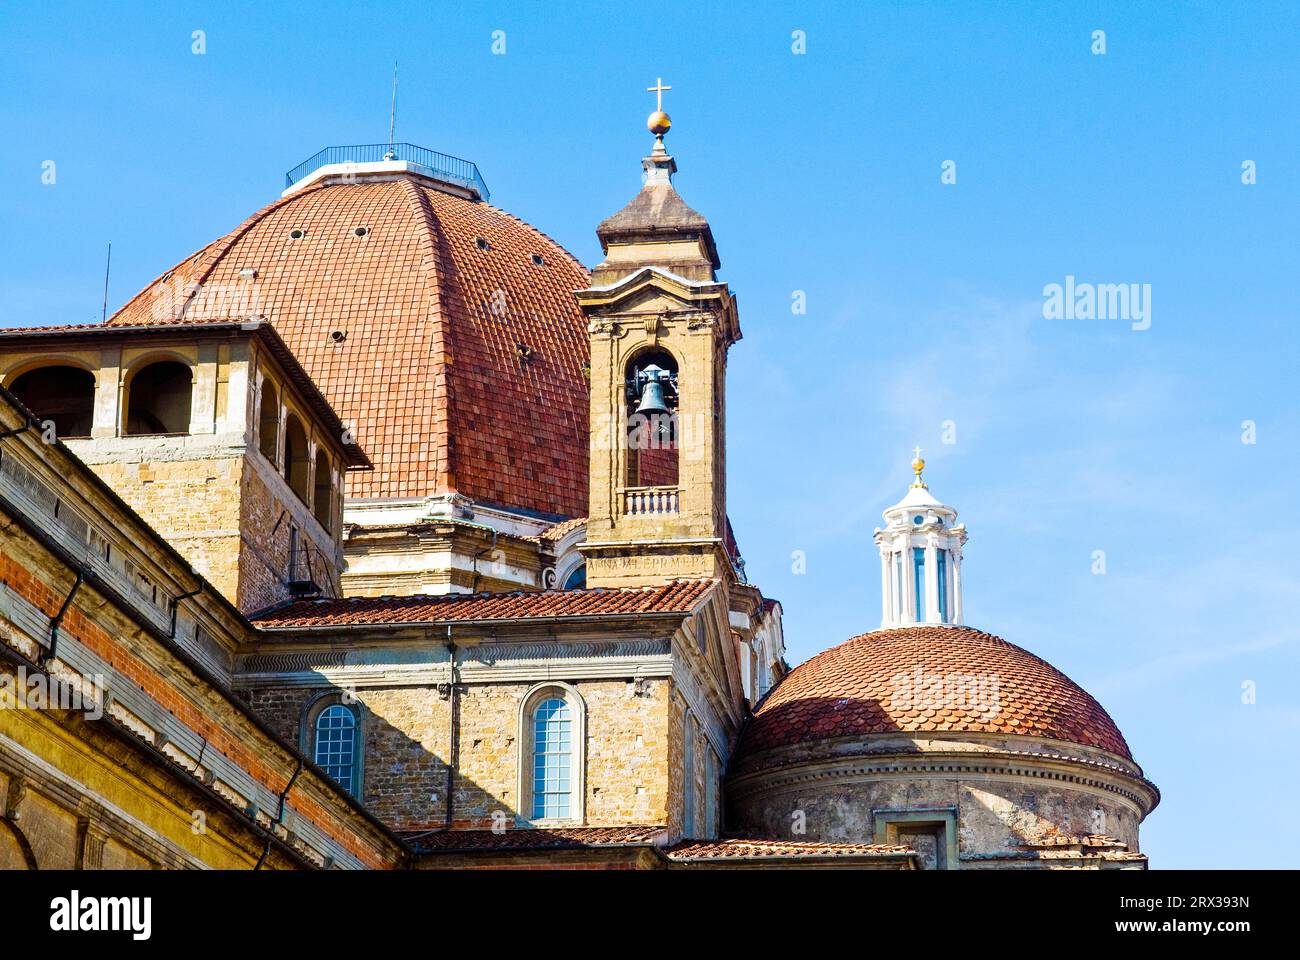 Cappelle Medicee, Firenze , Firenze, Tuscany, Italy, Europe Stock Photo